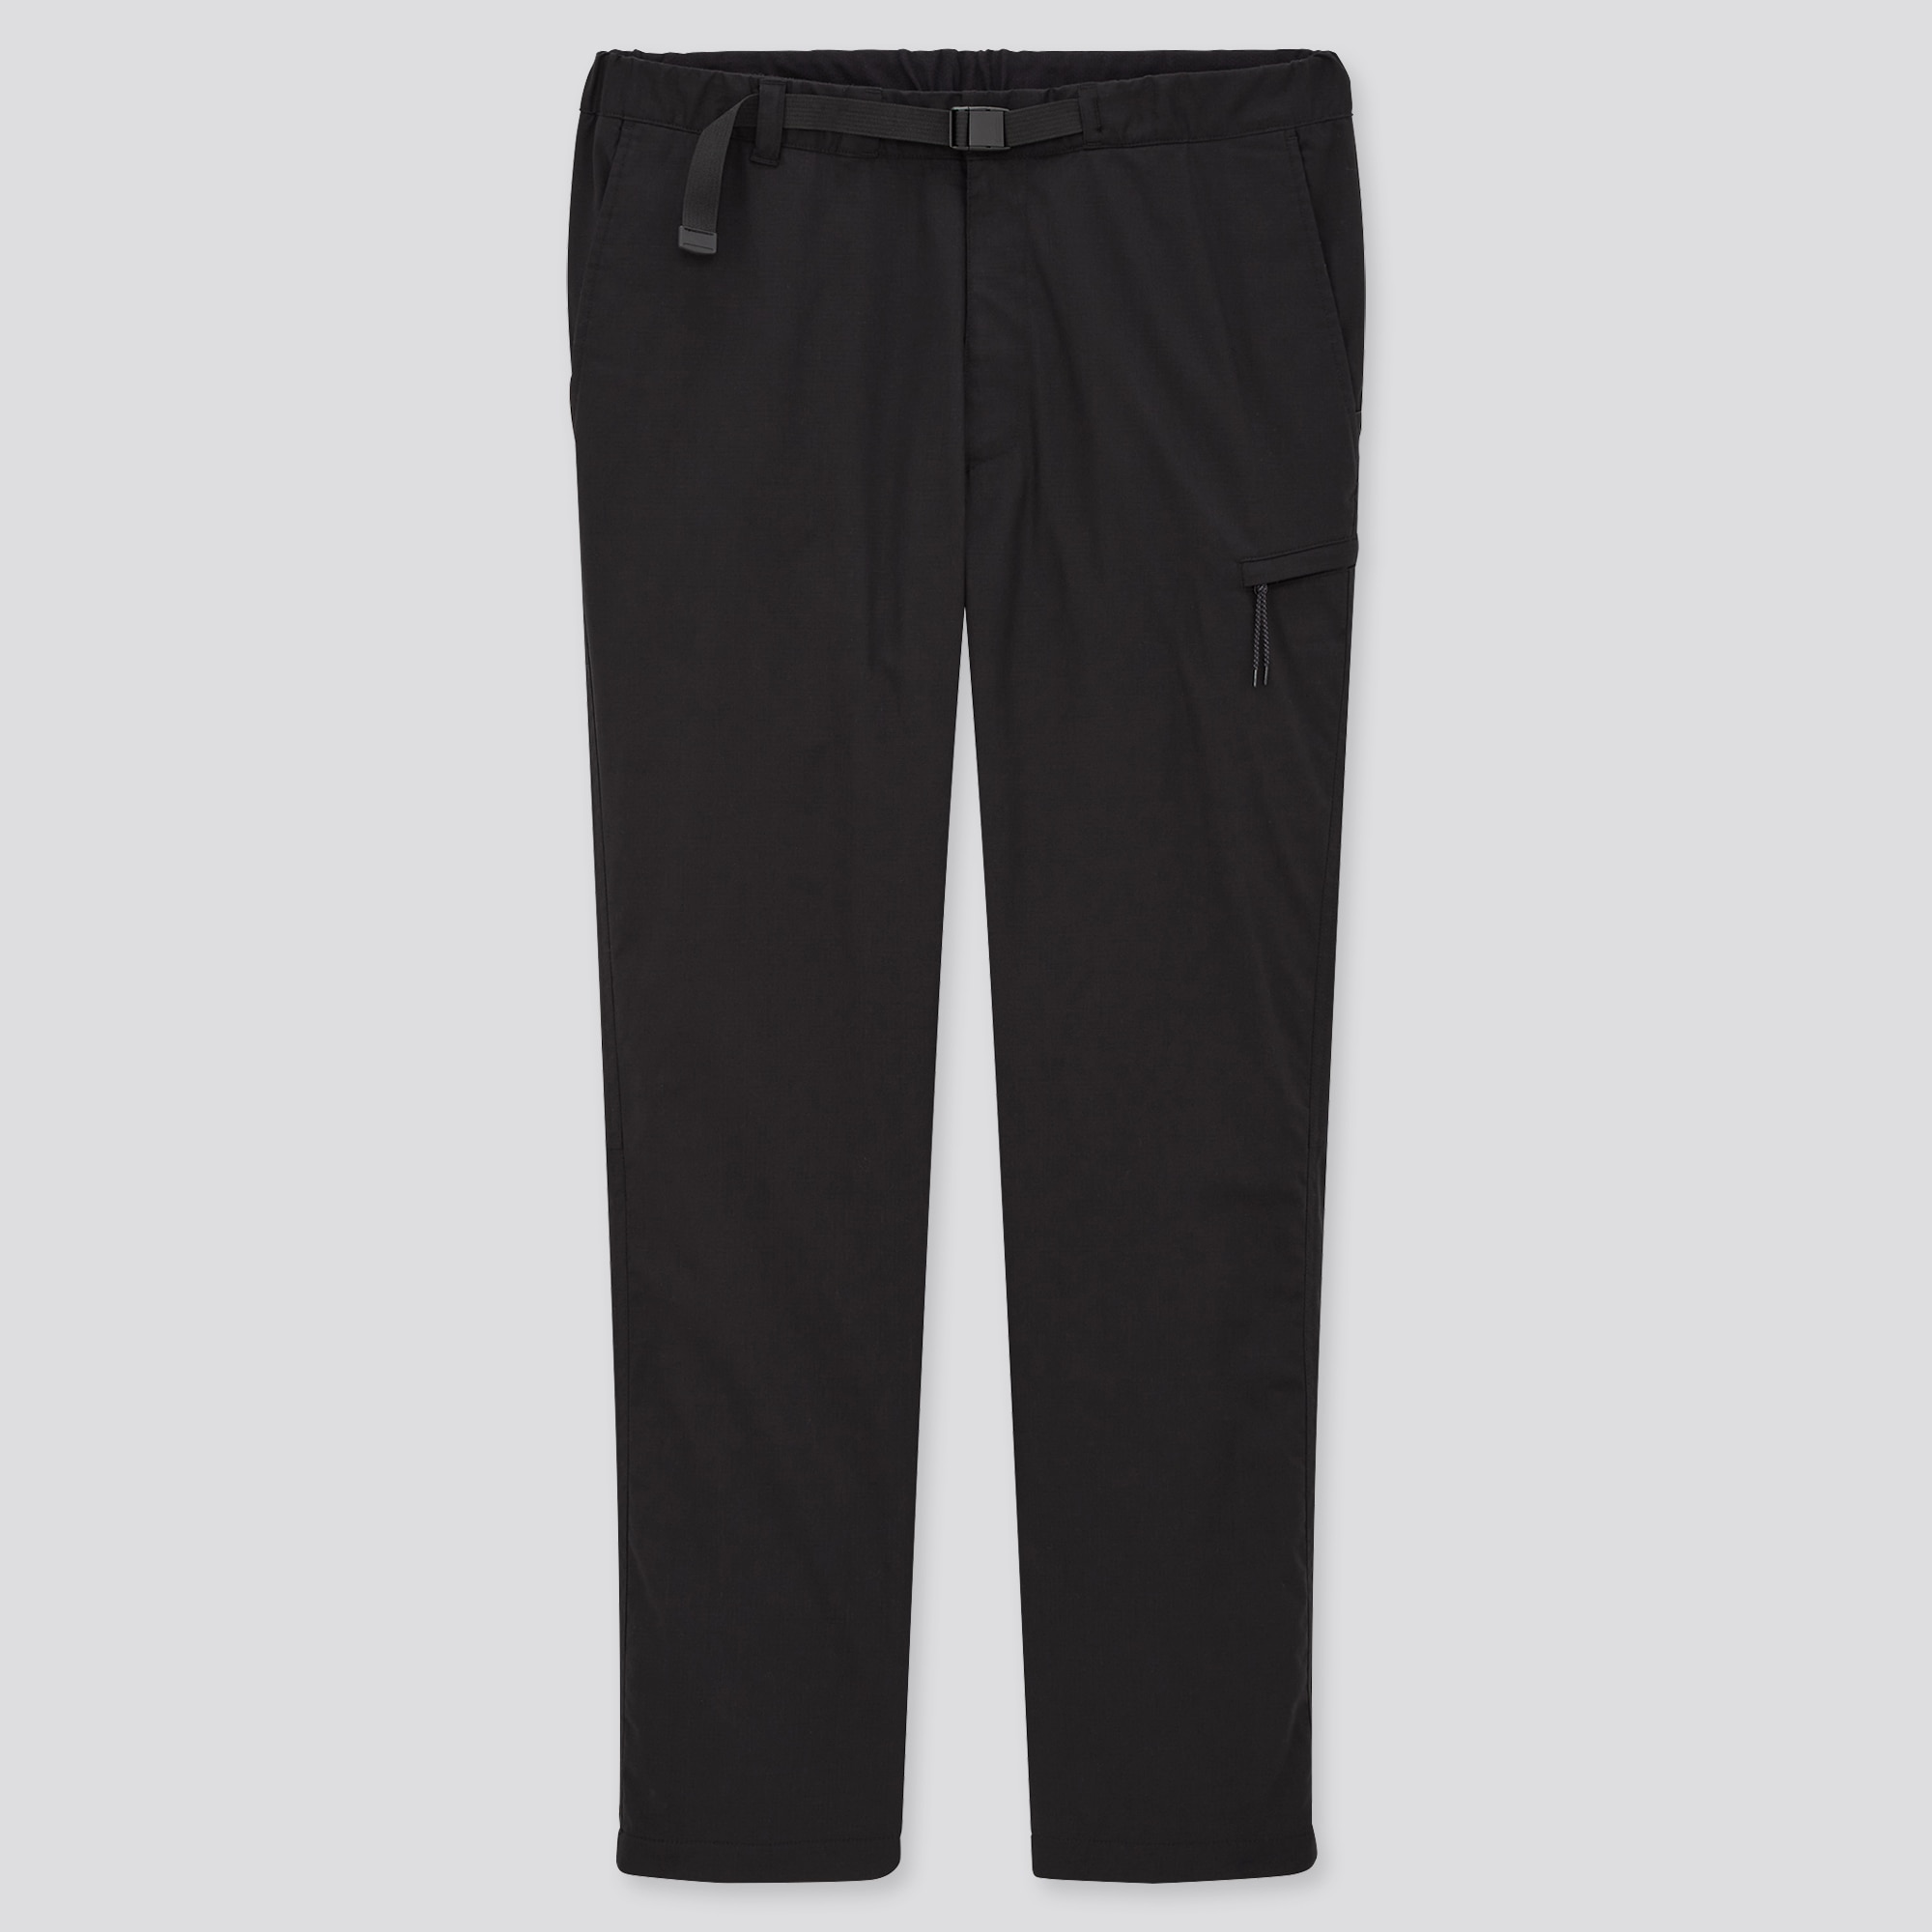 uniqlo thermal jeans